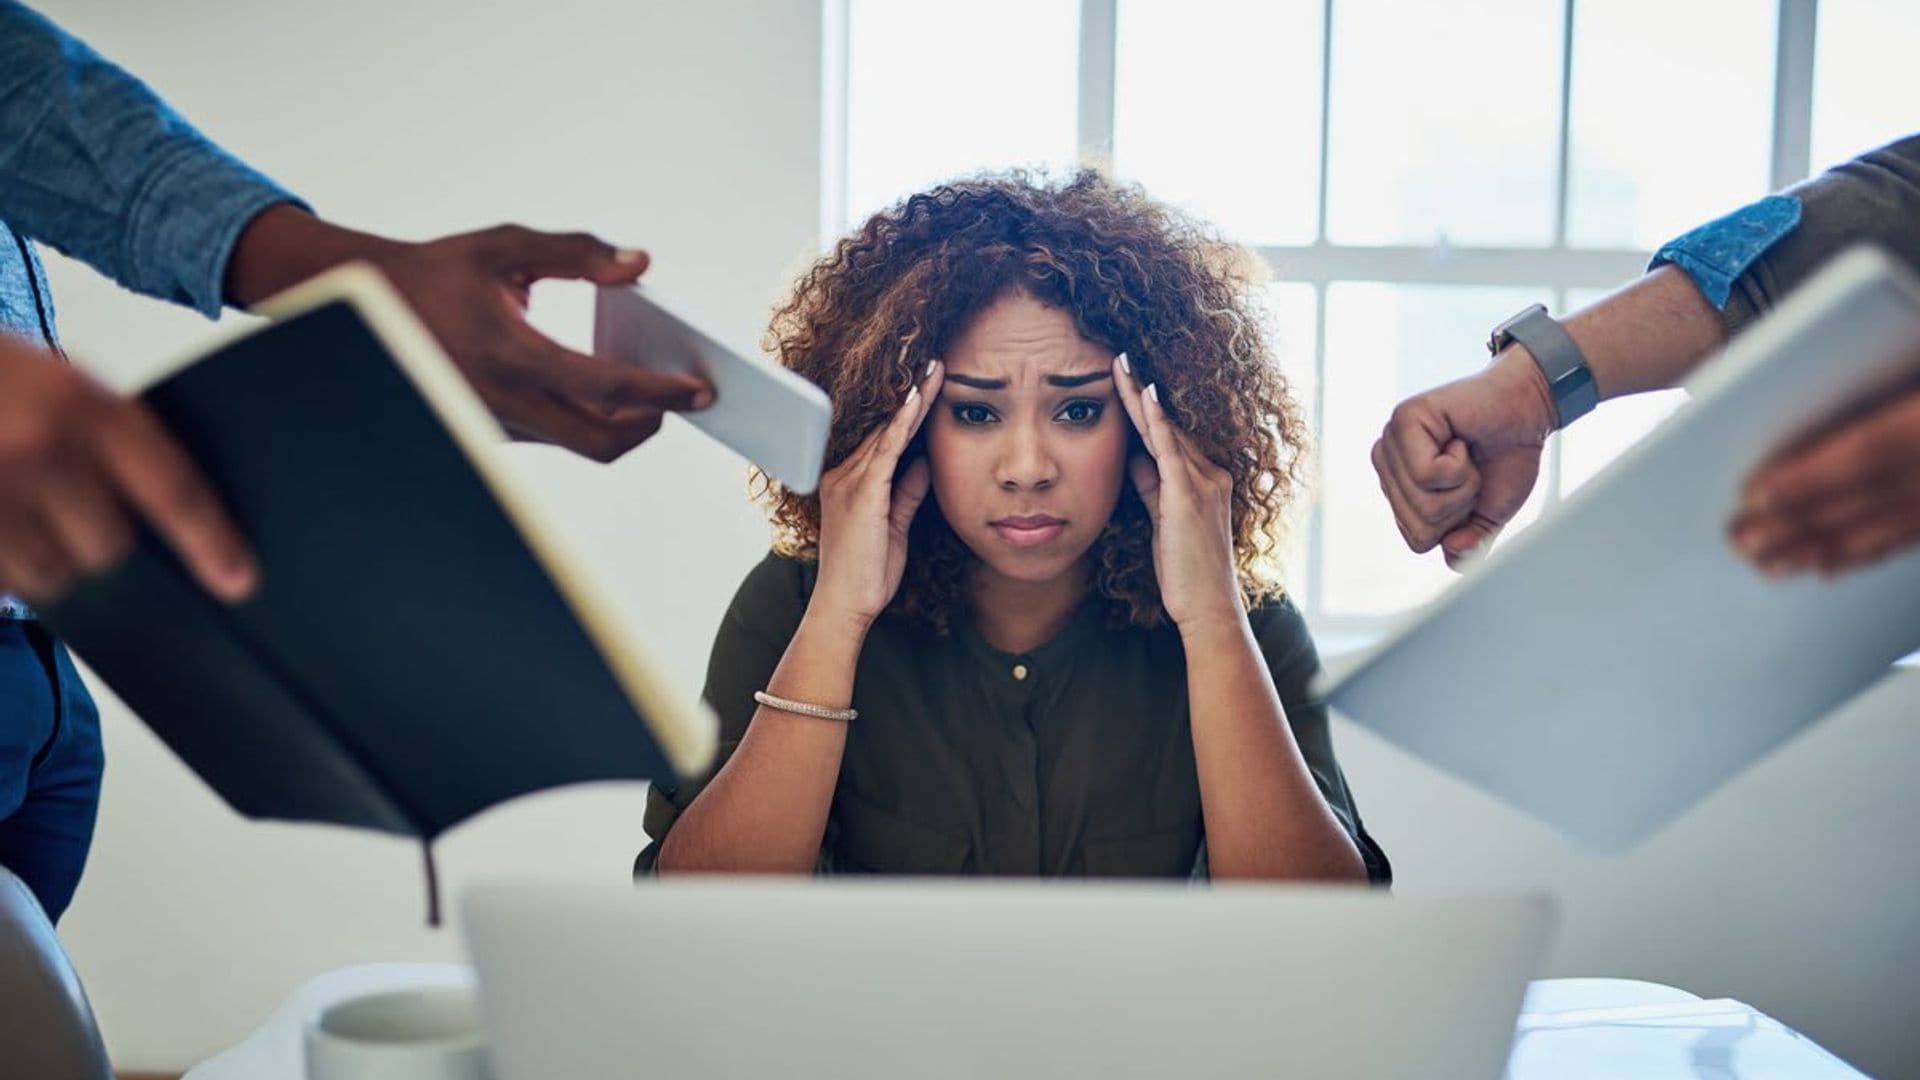 Feeling burnout and can’t focus? Top expert tips for dealing with difficult times